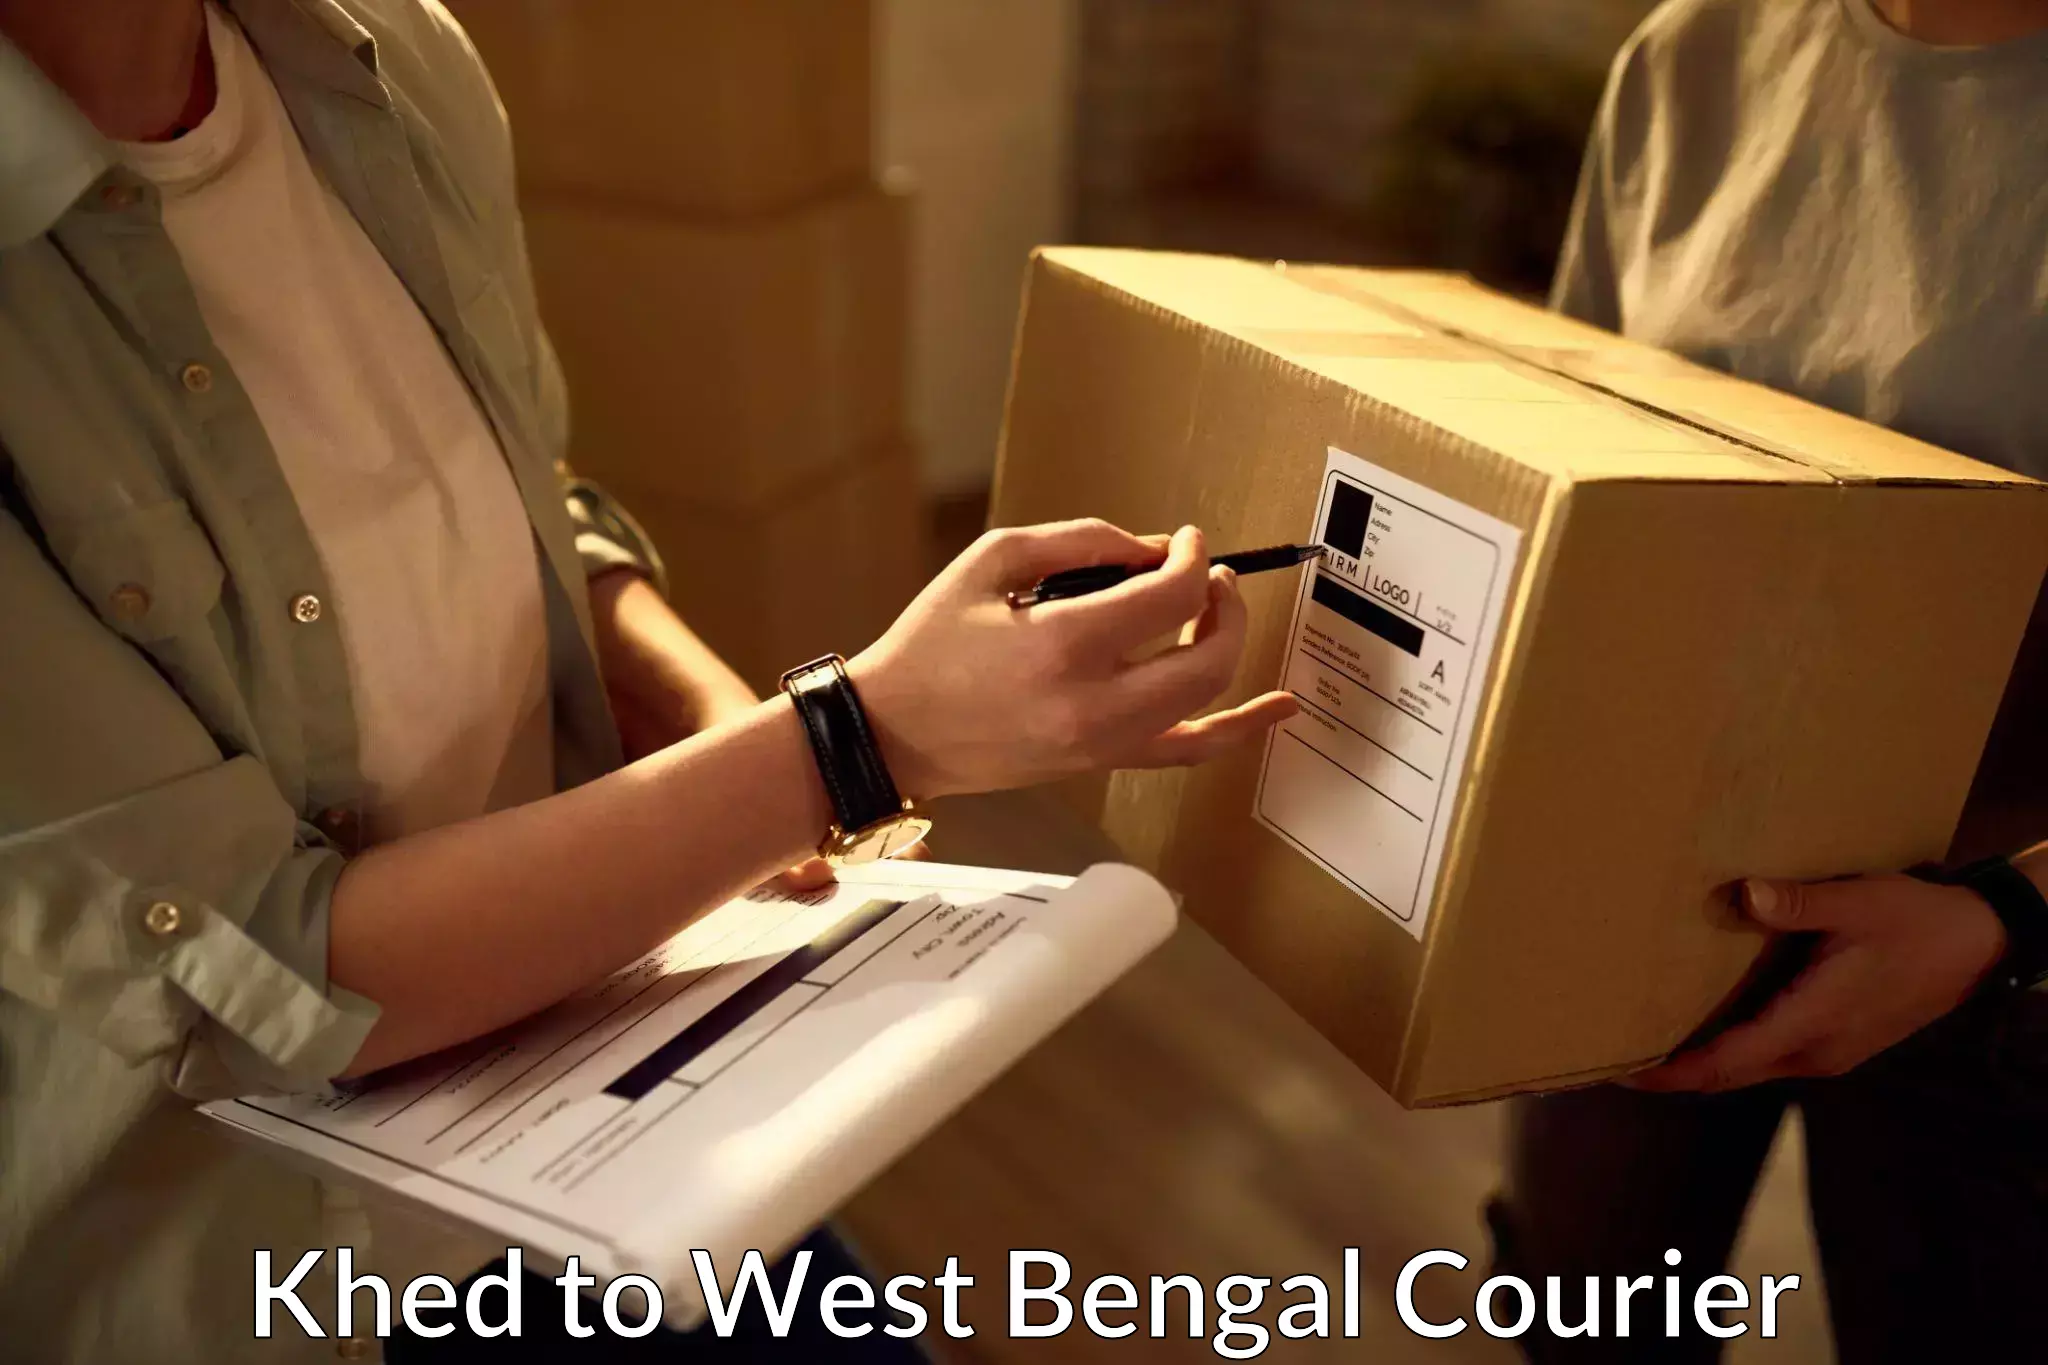 Multi-service courier options Khed to Kolkata Port